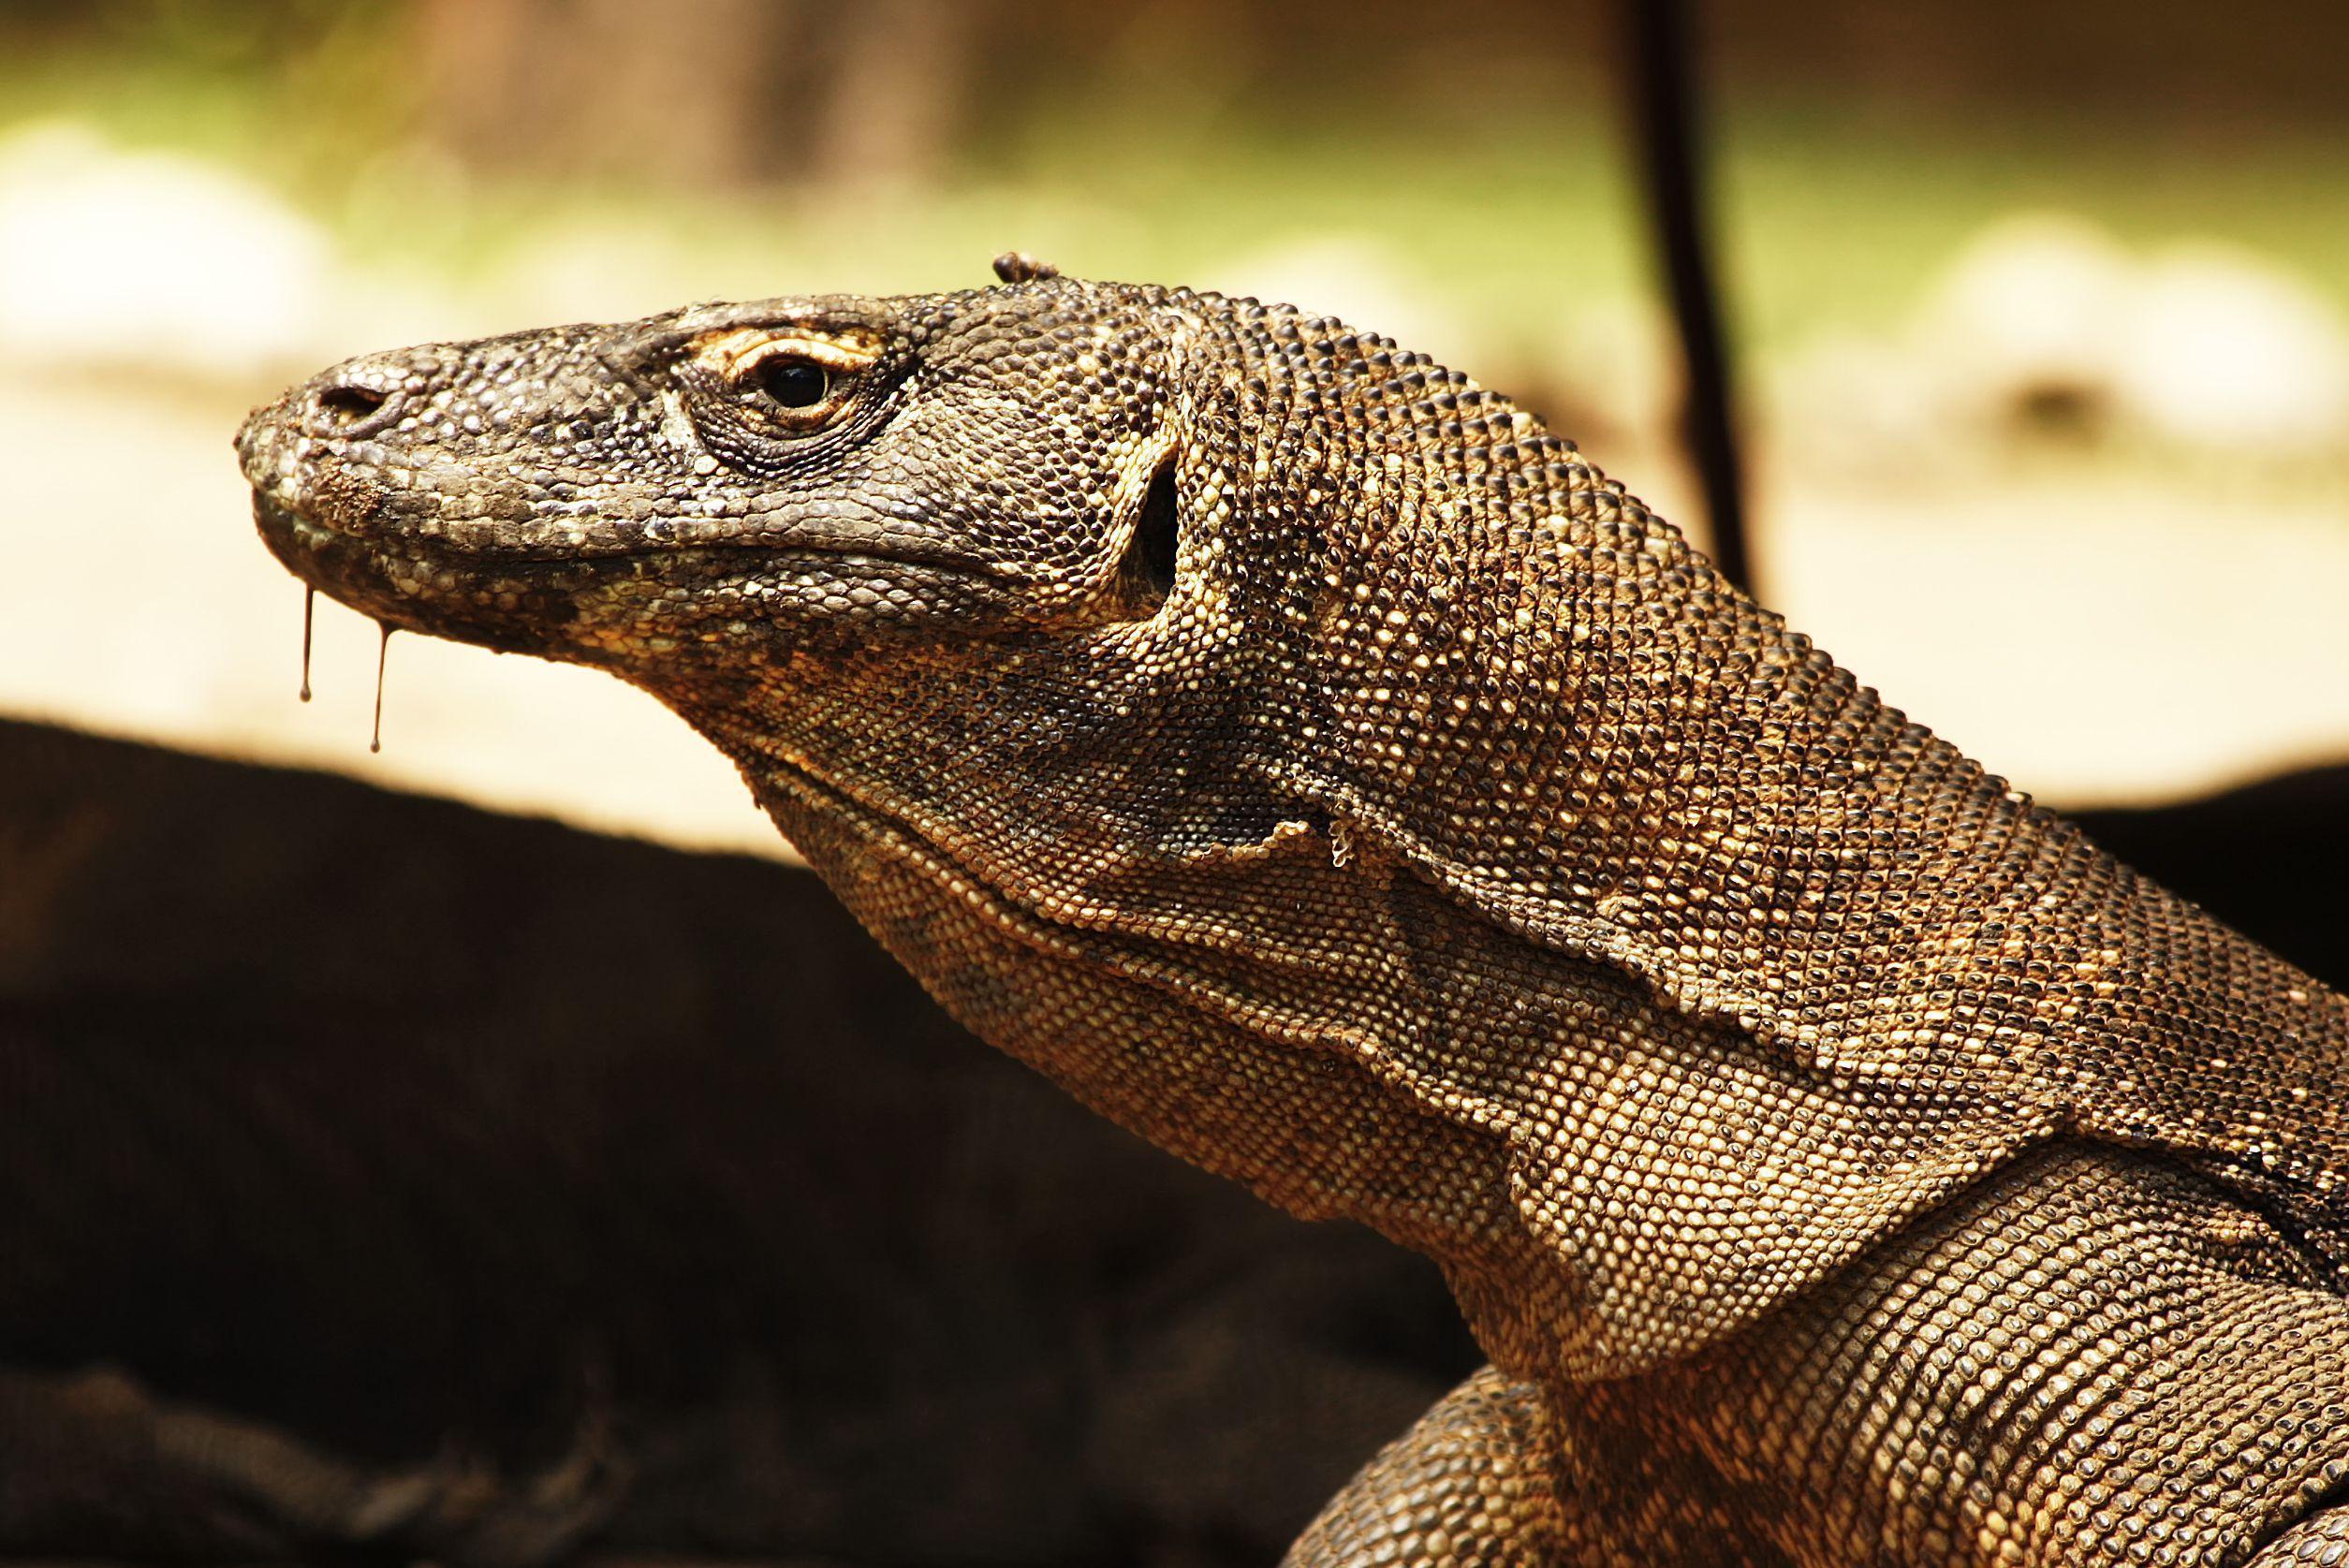 About comodo dragon ultravnc meaning of love